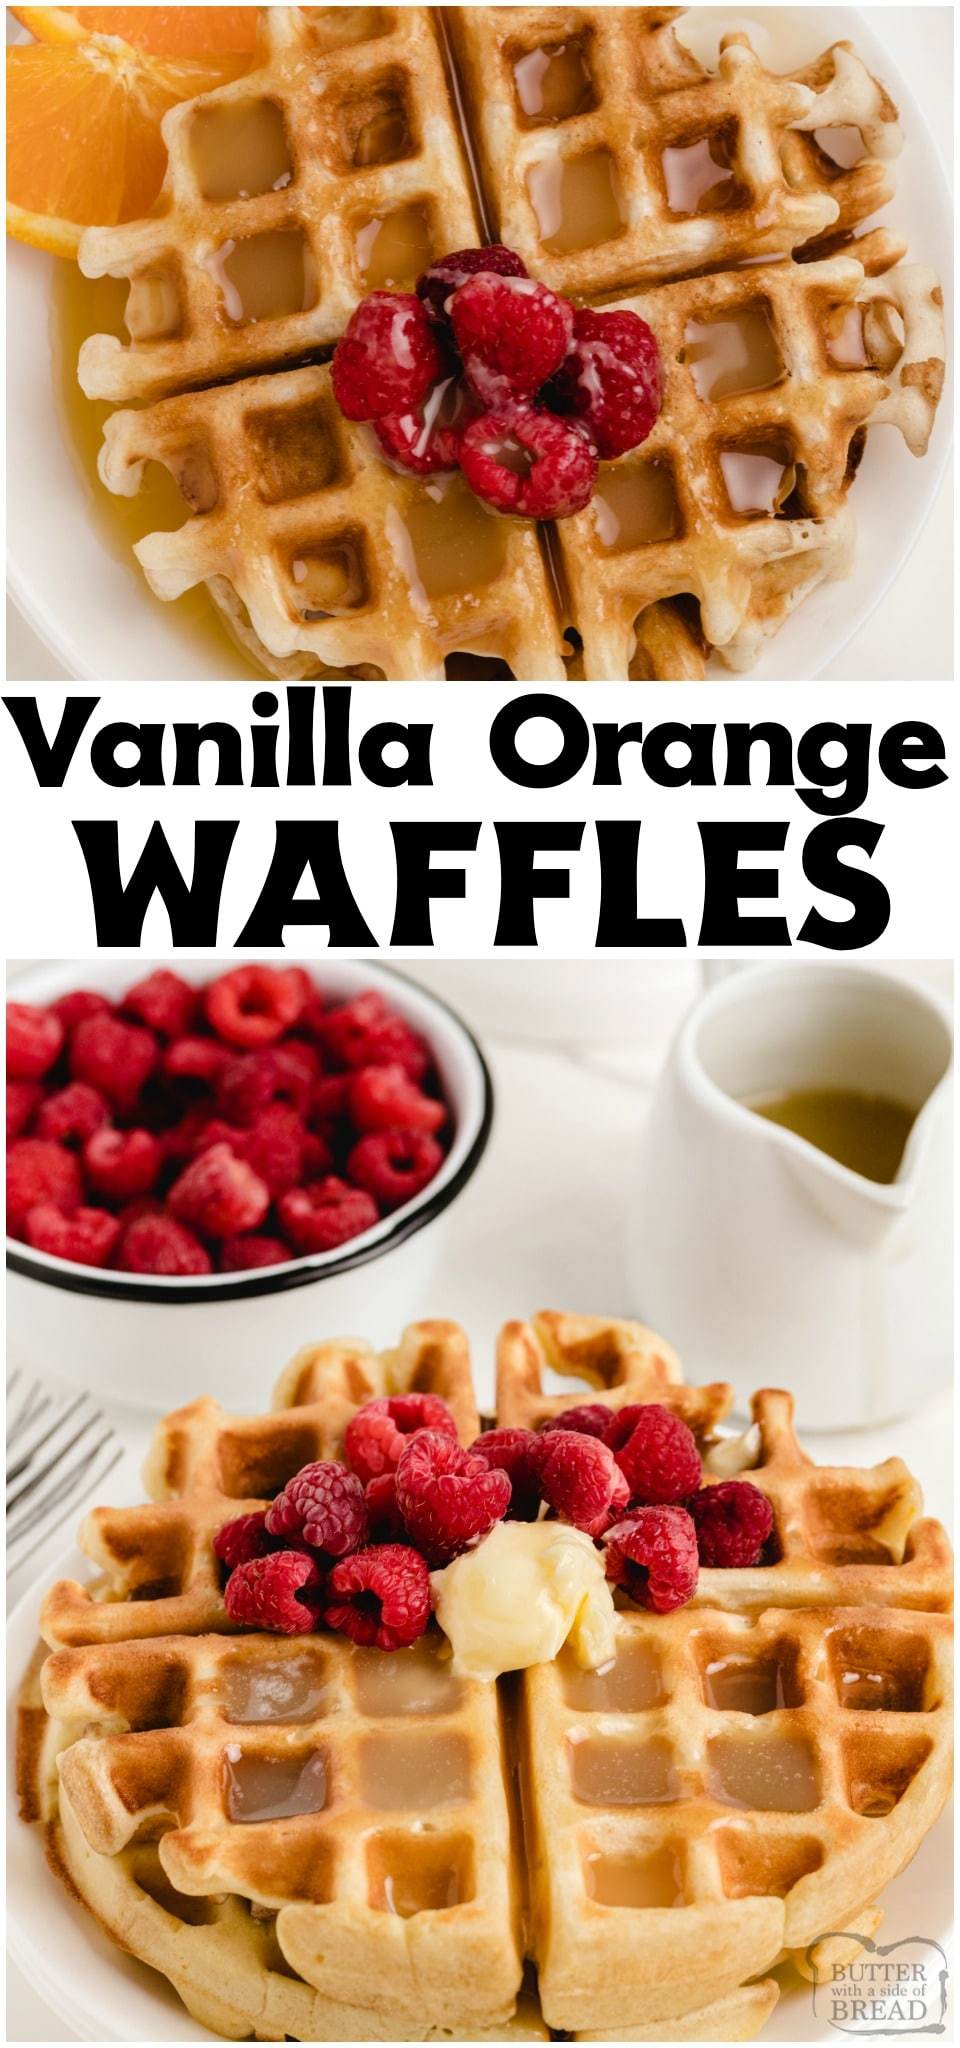 Vanilla Orange Waffles are a sweet citrus waffle served with homemade vanilla butter syrup. Fantastic variation on a traditional waffle recipe that everyone loves! #waffles #vanilla #orange #citrus #breakfast #homemade #recipe from BUTTER WITH A SIDE OF BREAD